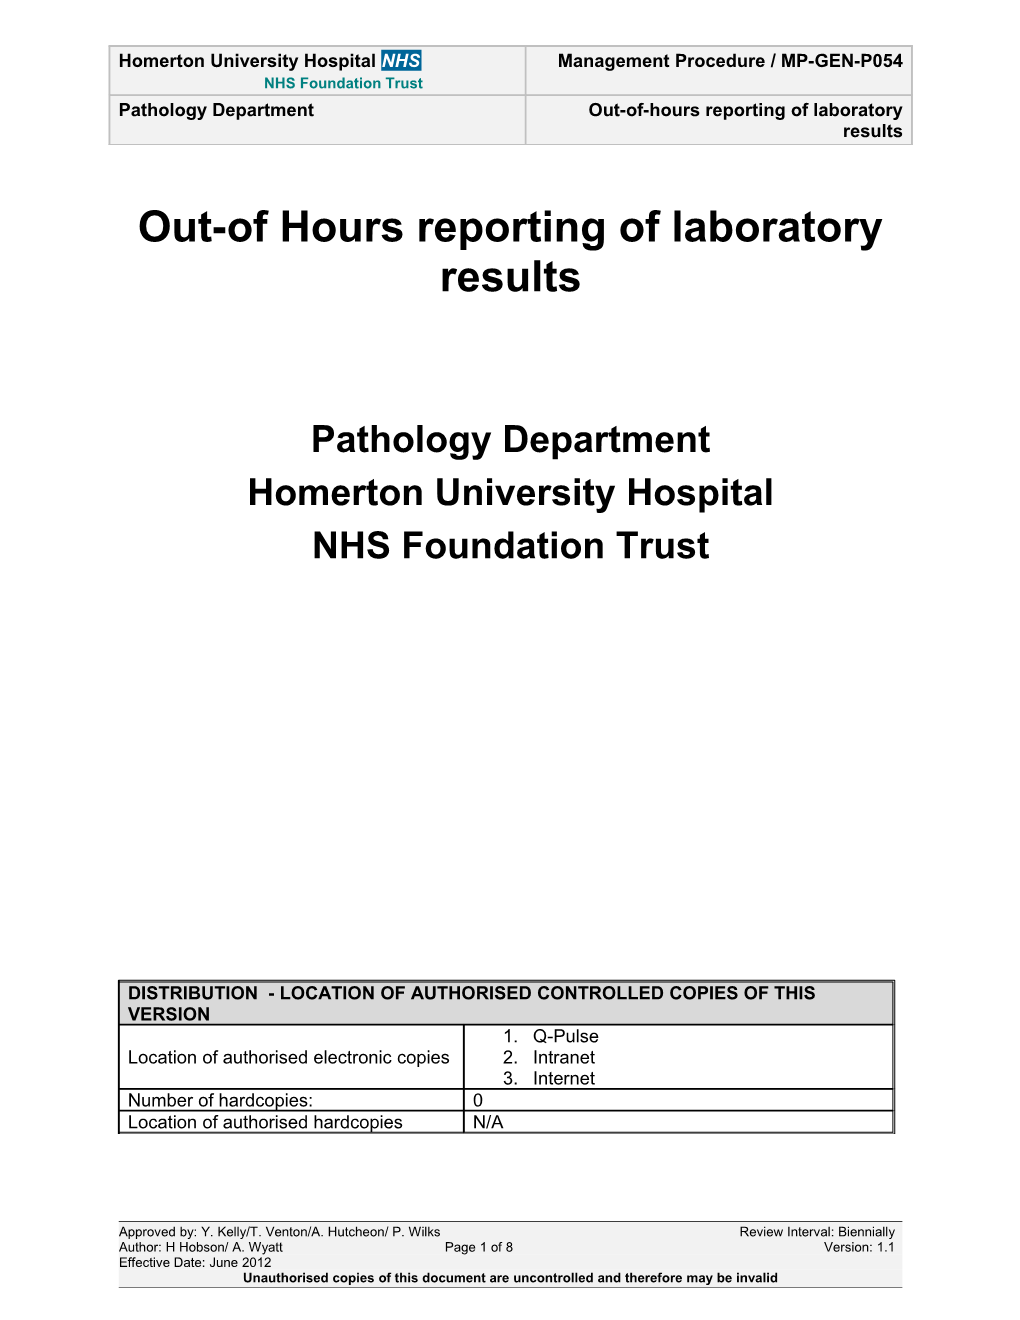 Out-Of Hours Reporting of Laboratory Results